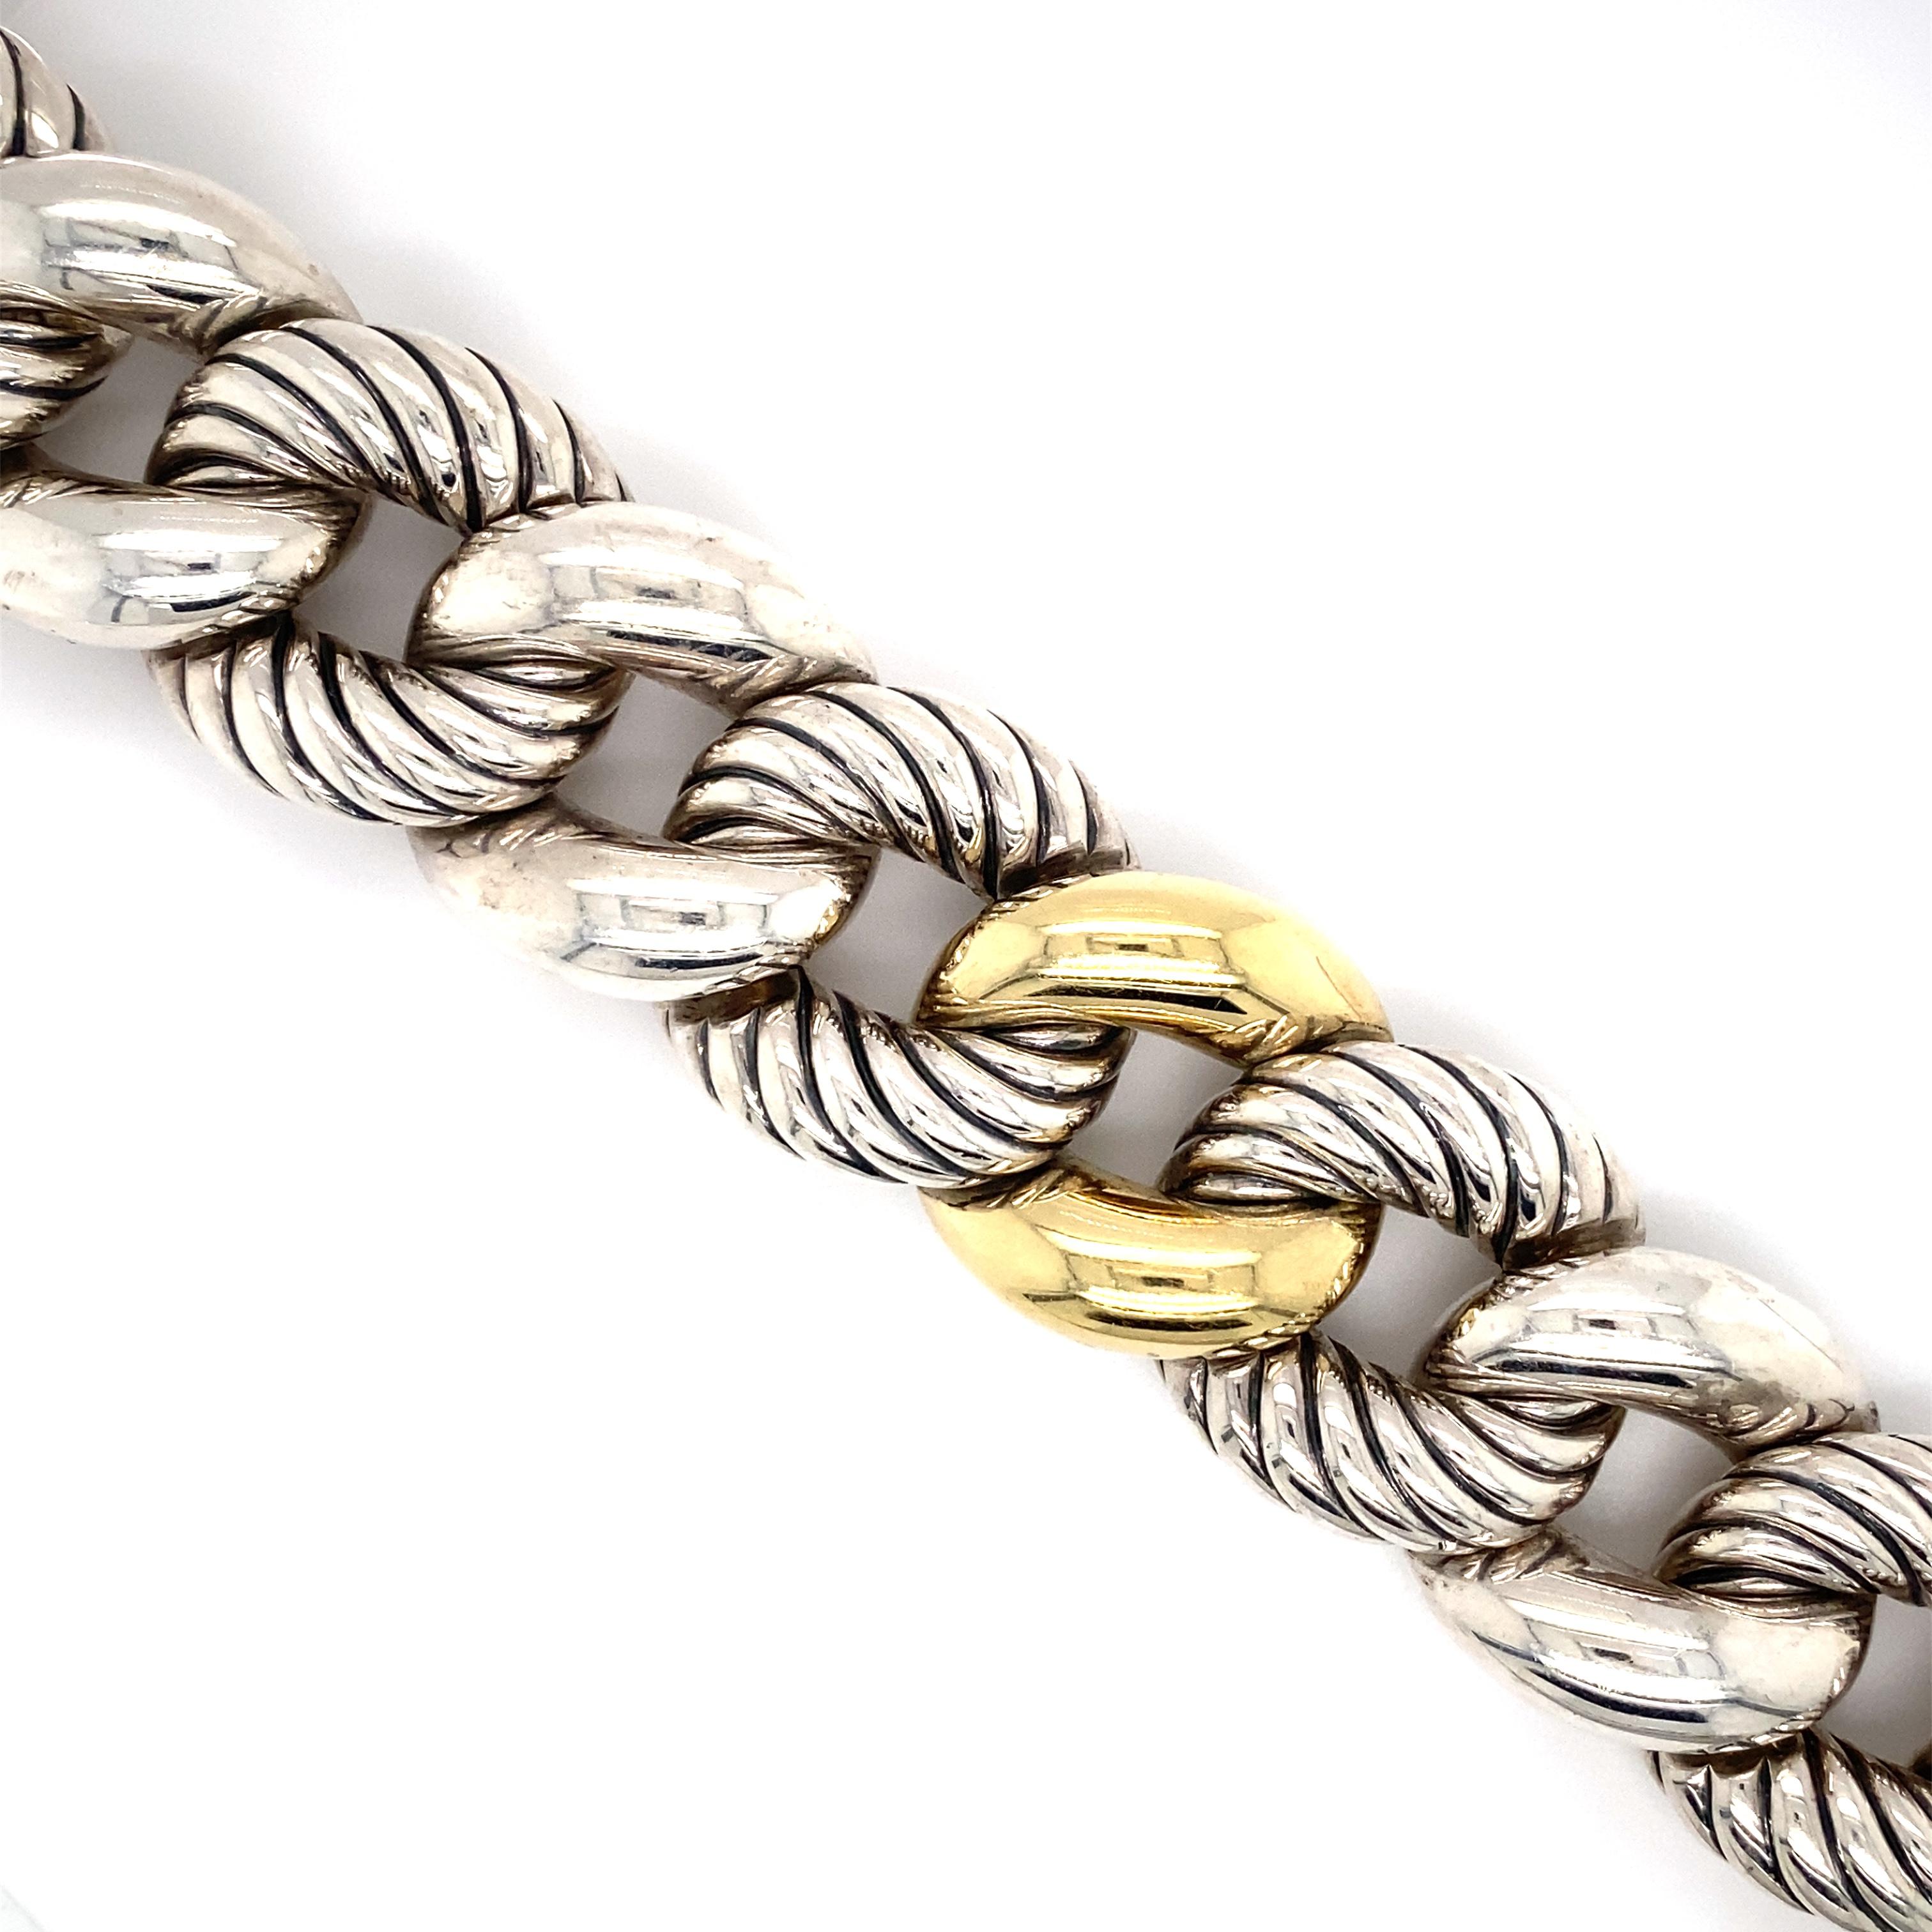 Item Details: This large curb link bracelet by David Yurman has 18k gold accents and is a great accessory to add as a statement!

Circa: 2000s
Metal Type: Sterling Silver and 18 Karat Yellow Gold
Dimensions: 8 inch Length x 1 inch Width